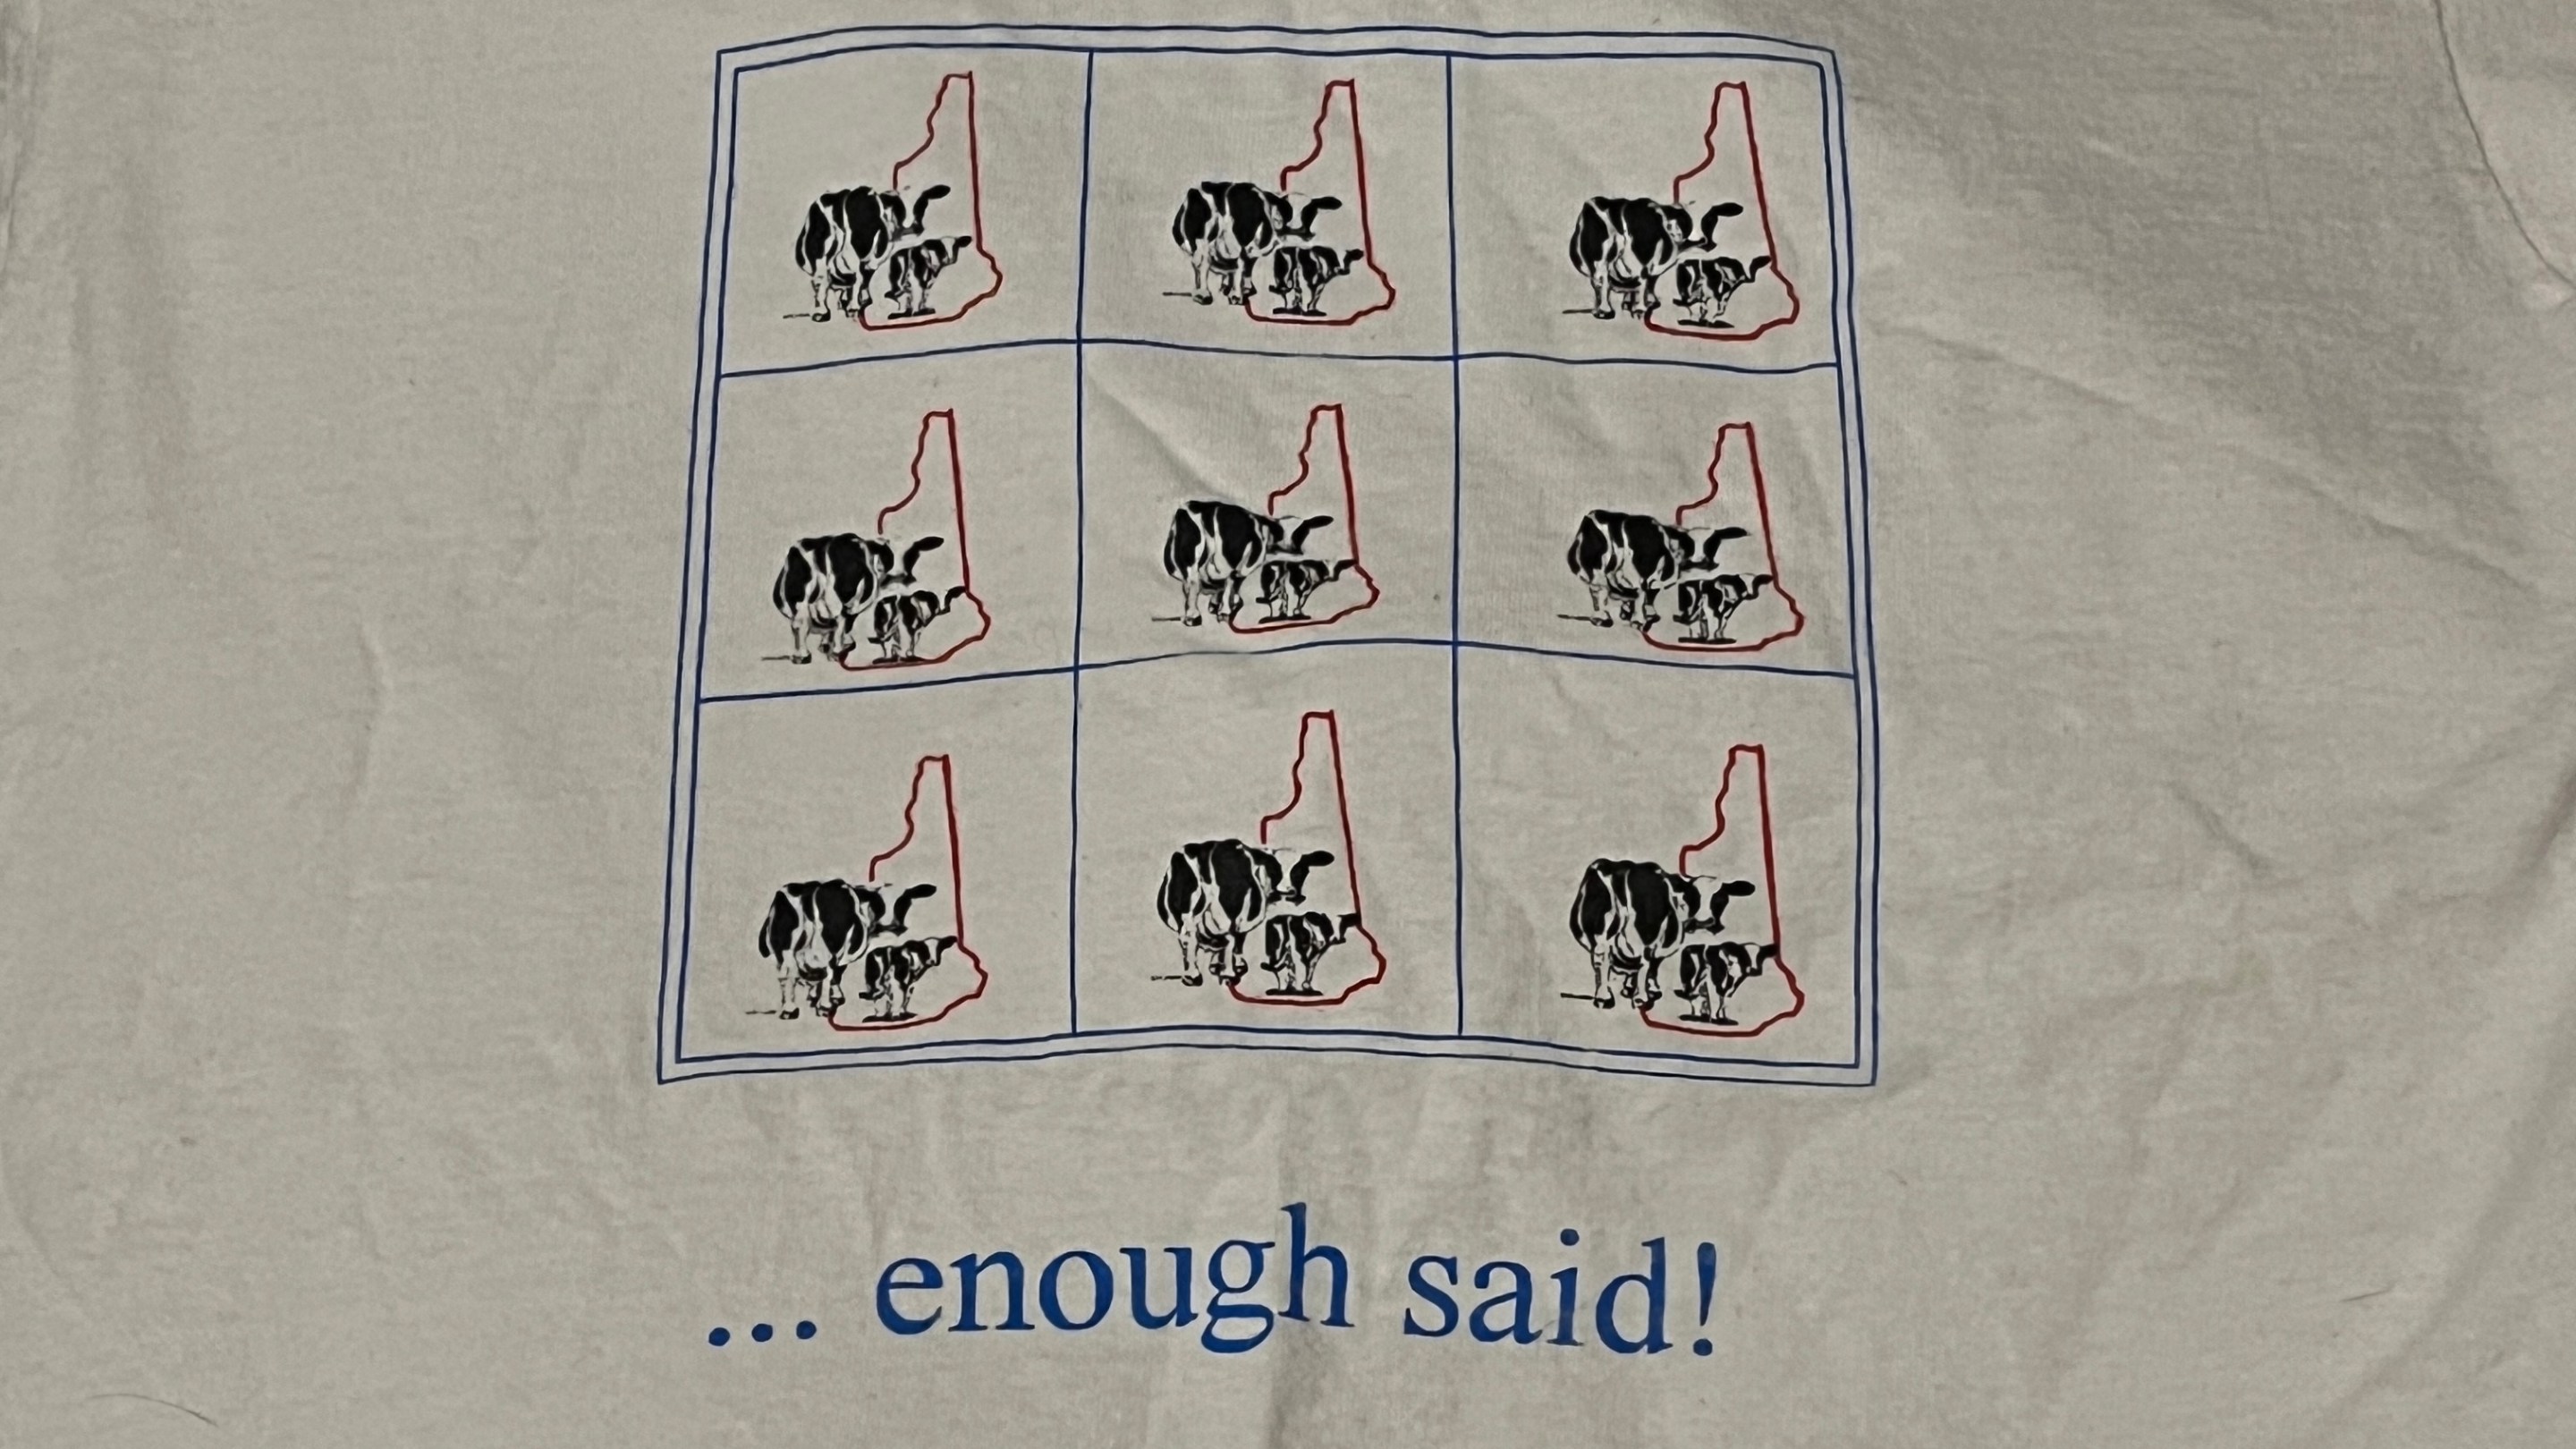 A t-shirt with a three-by-three grid. Each box has two cows standing in front of the state of New Hampshire. The bottom of the shirt says "... enough said!"